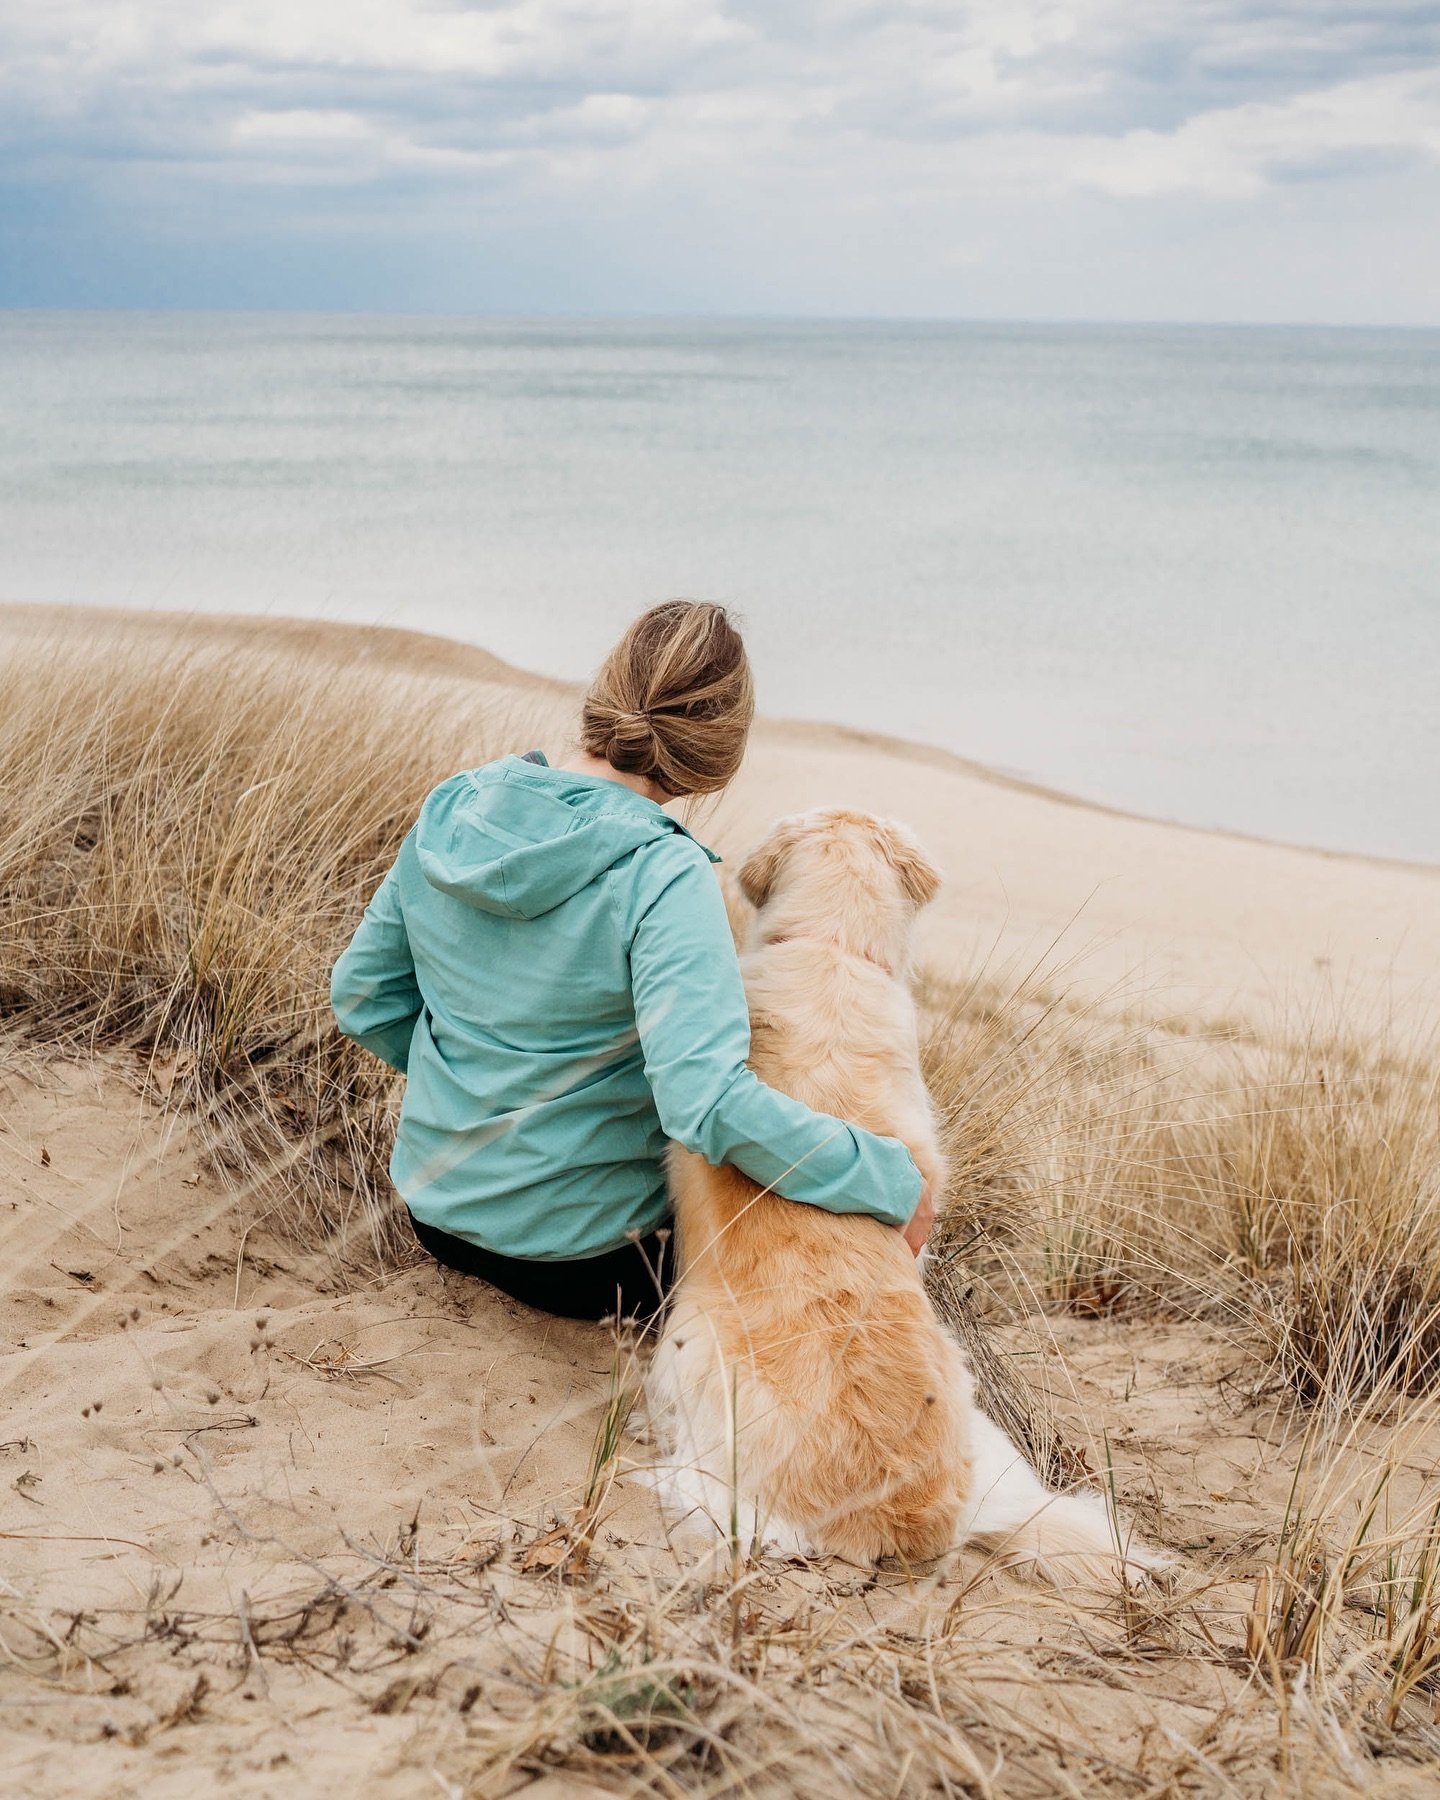 Maybe you were just meant to be a dog mom 🫶

#dogmom #goldenretriever #puremichigan